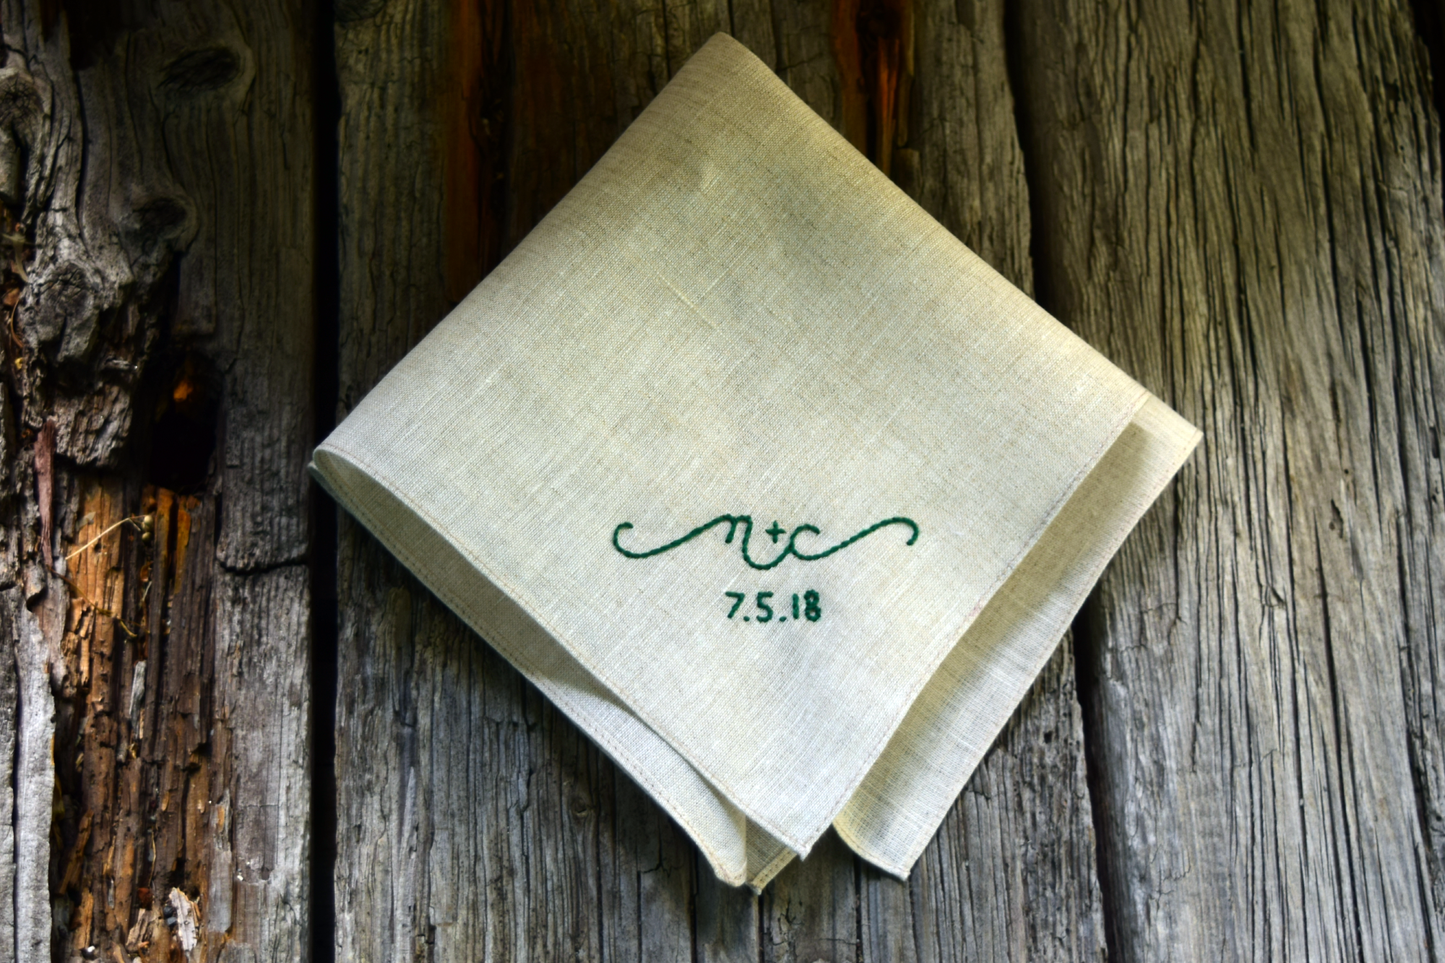 Oatmeal linen pocket square with initials and date